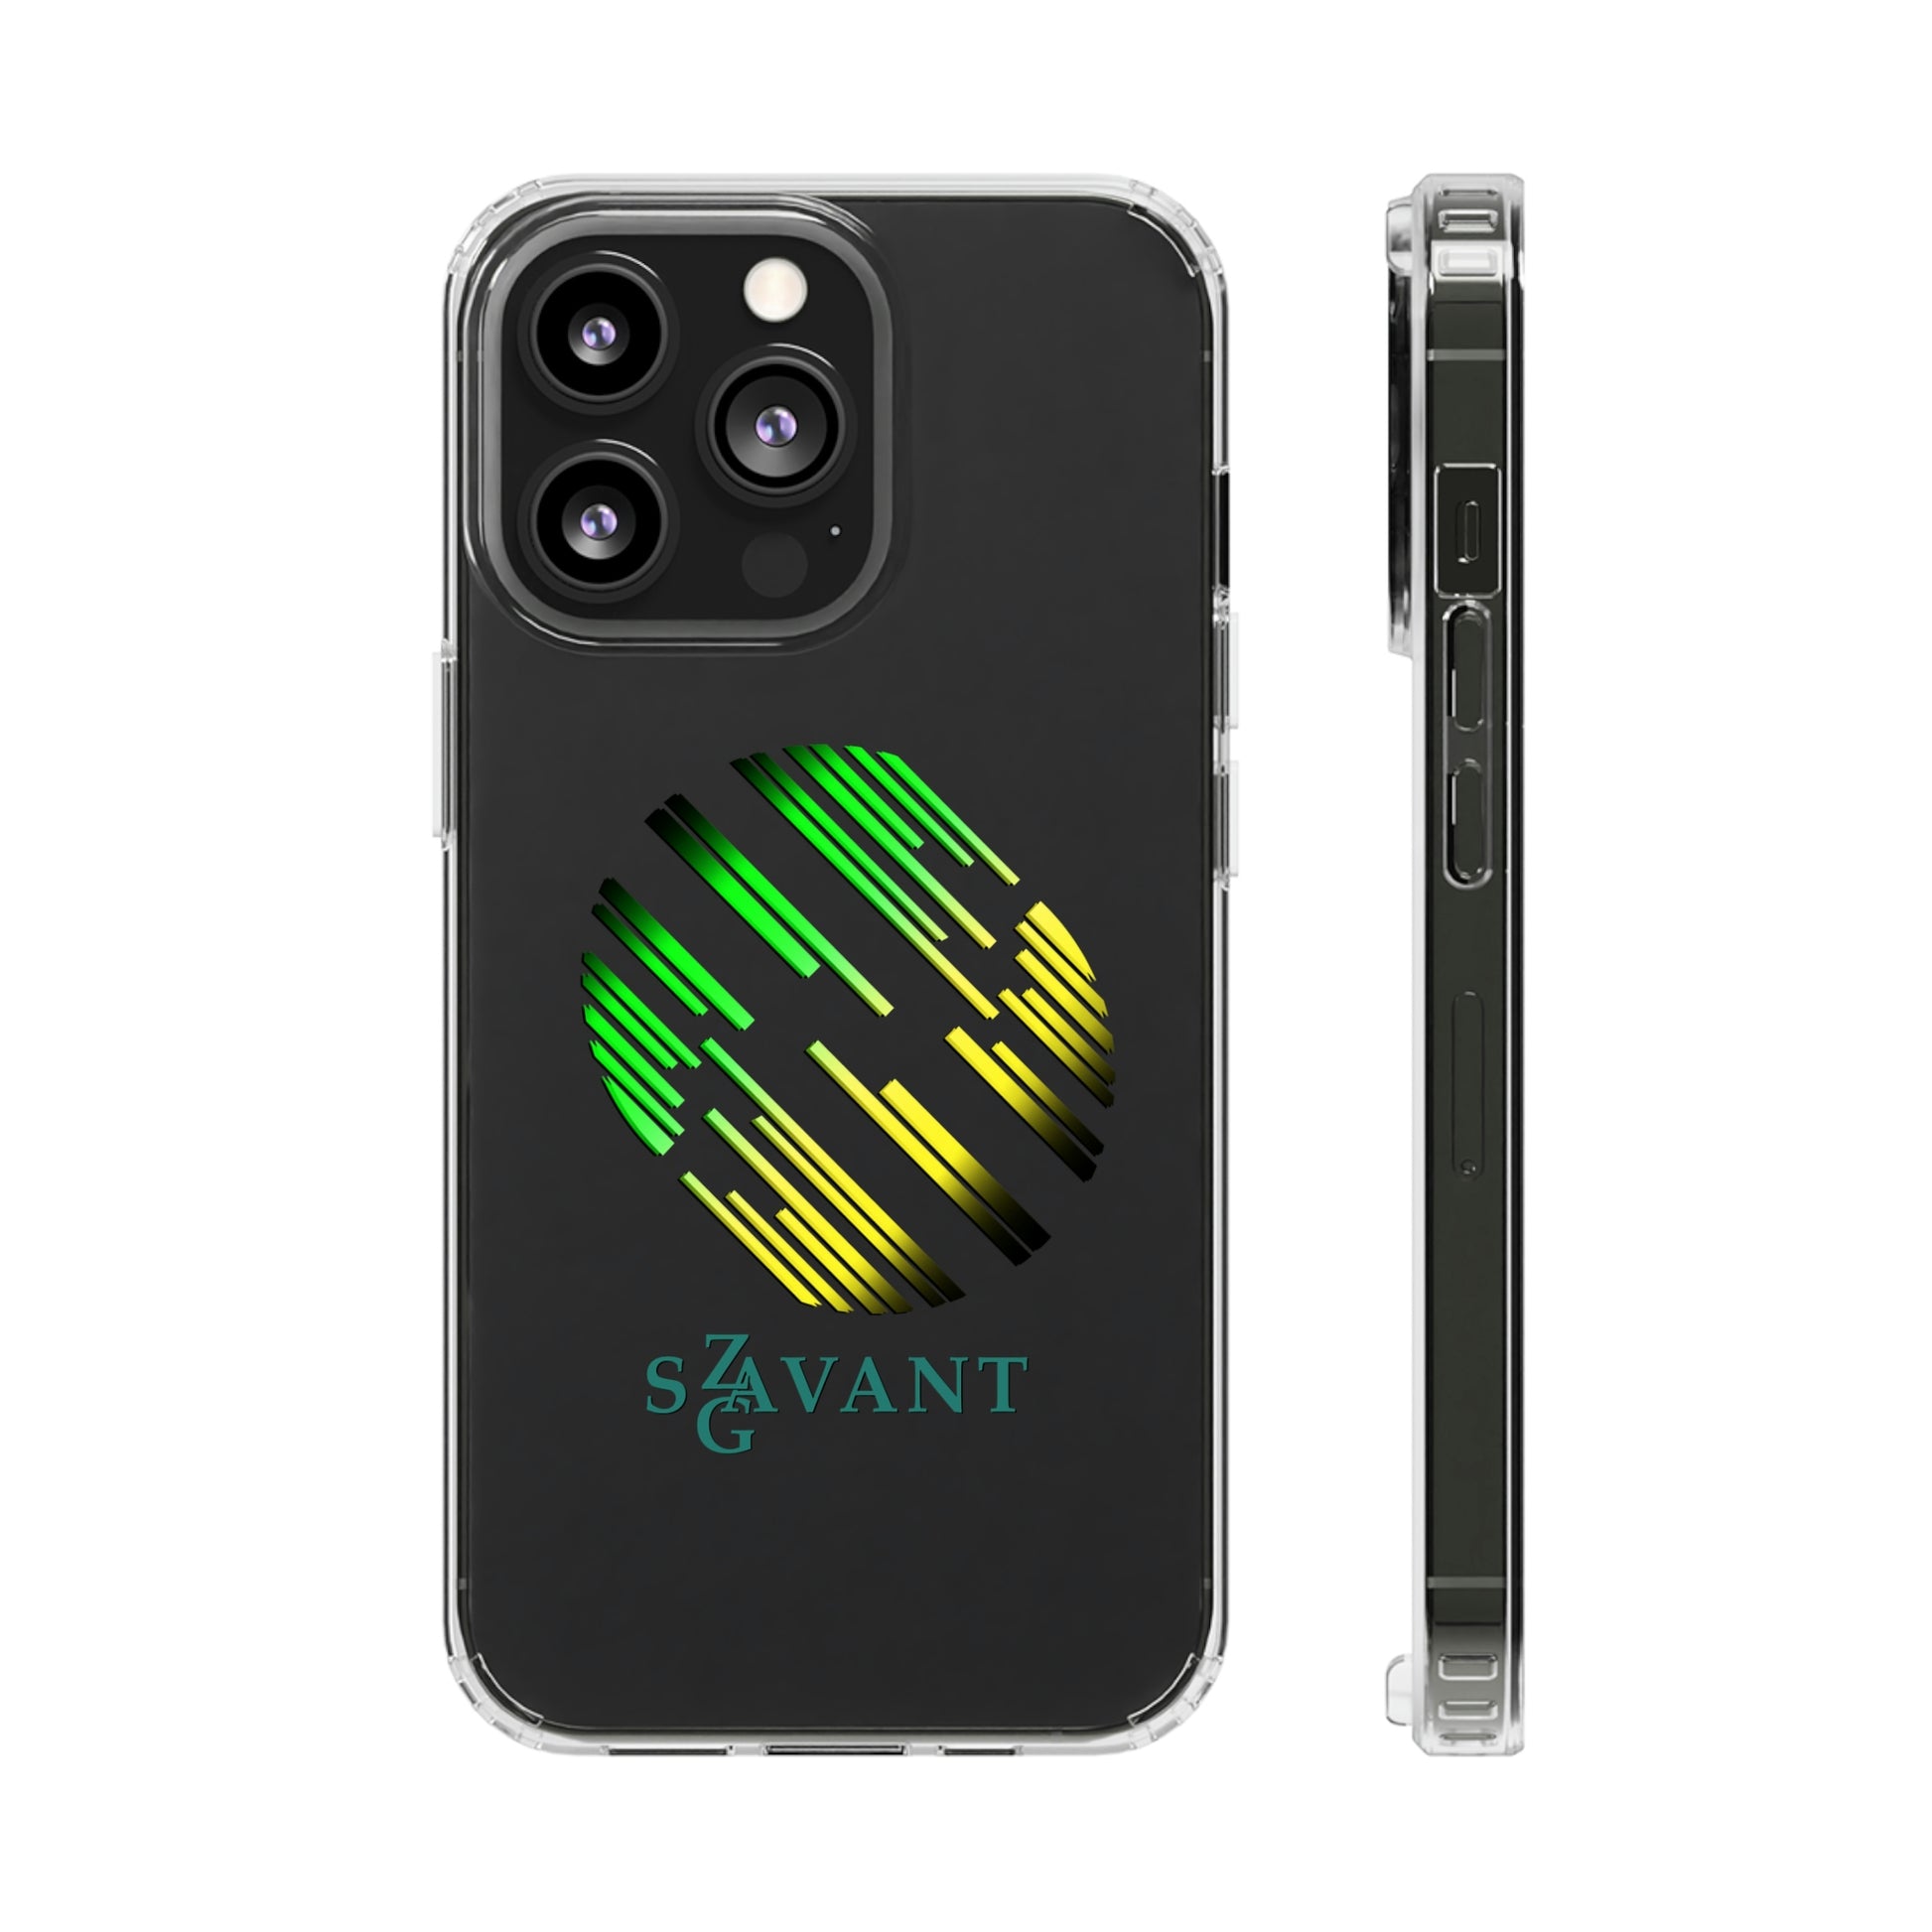 Phone Cases for iPhone